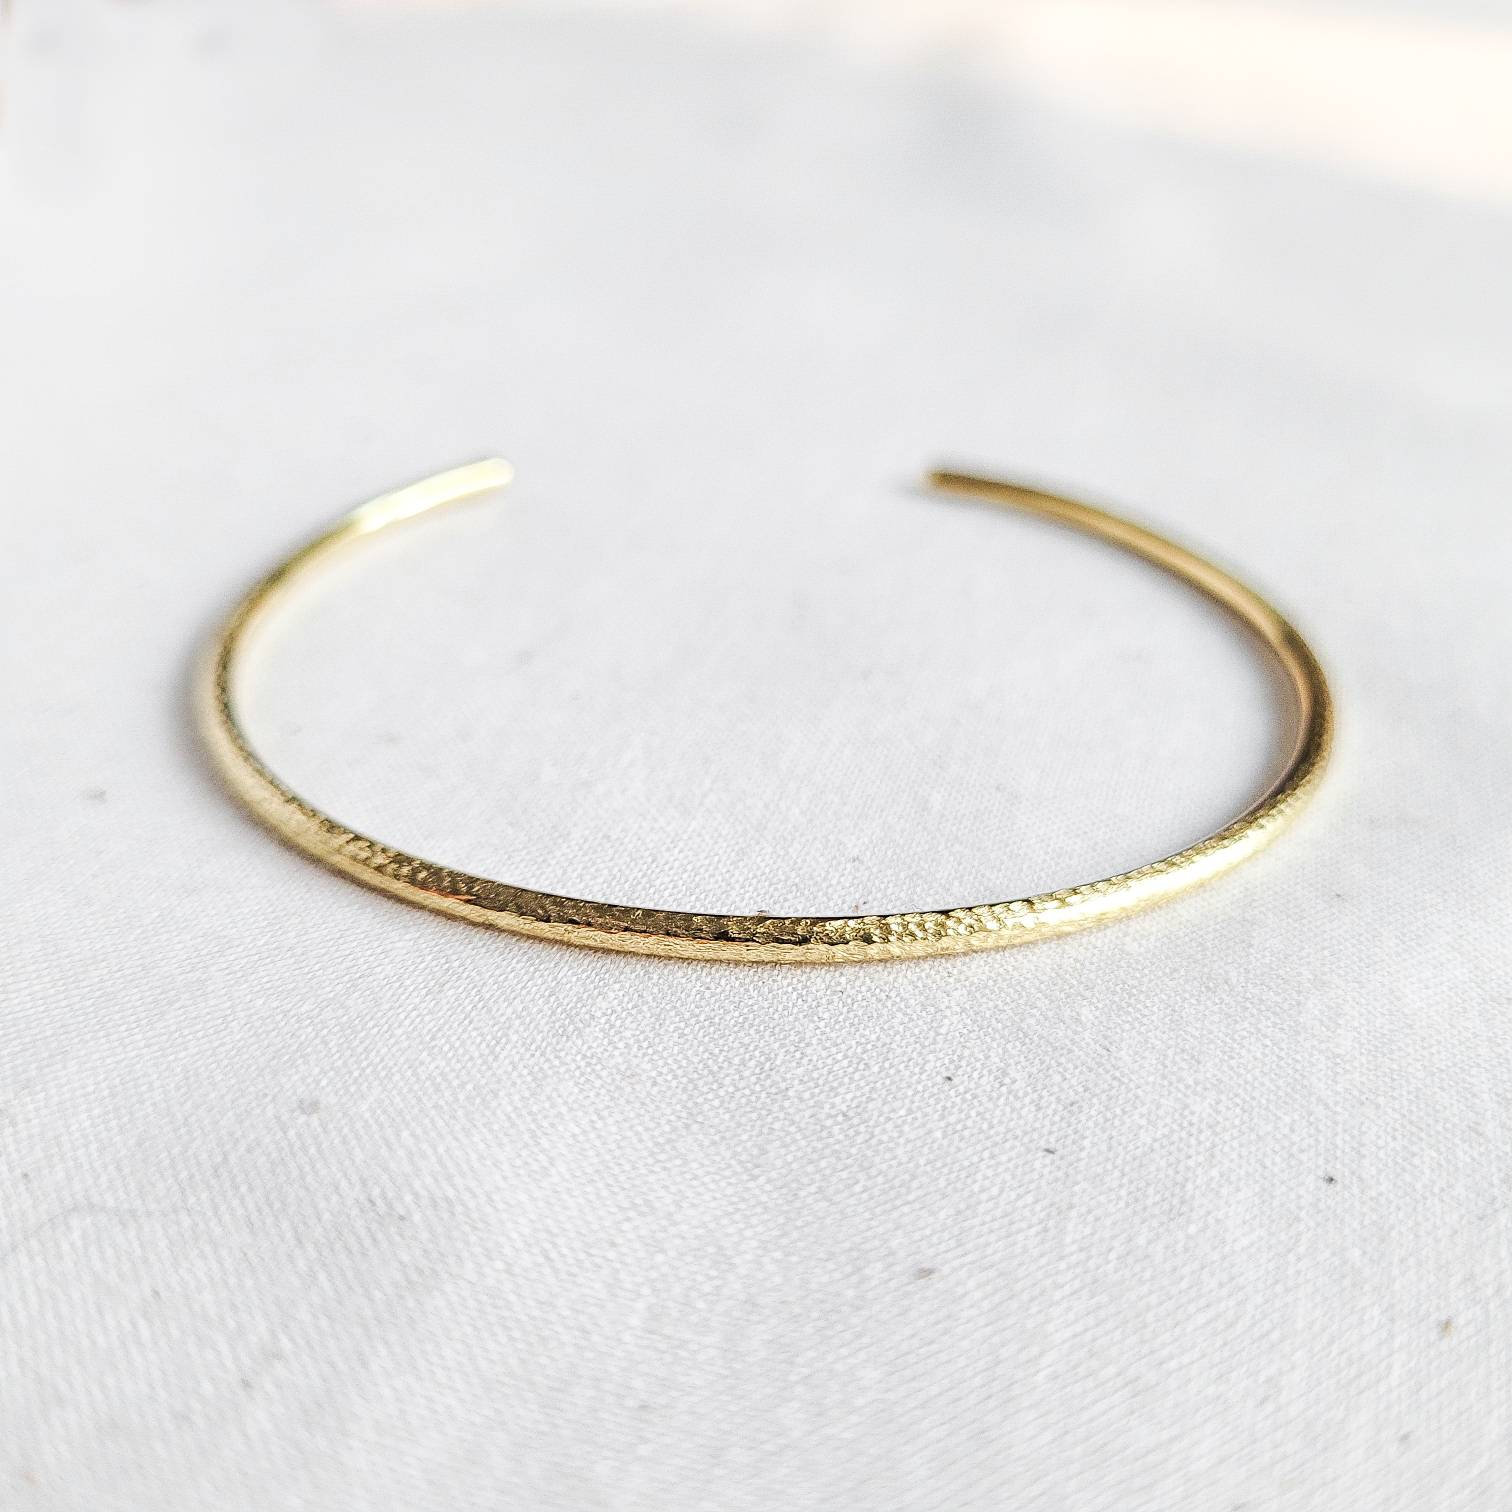 Thin Gold Bangle, Skinny Bracelet, Simple Slim Dainty Textured Stacking Cuff